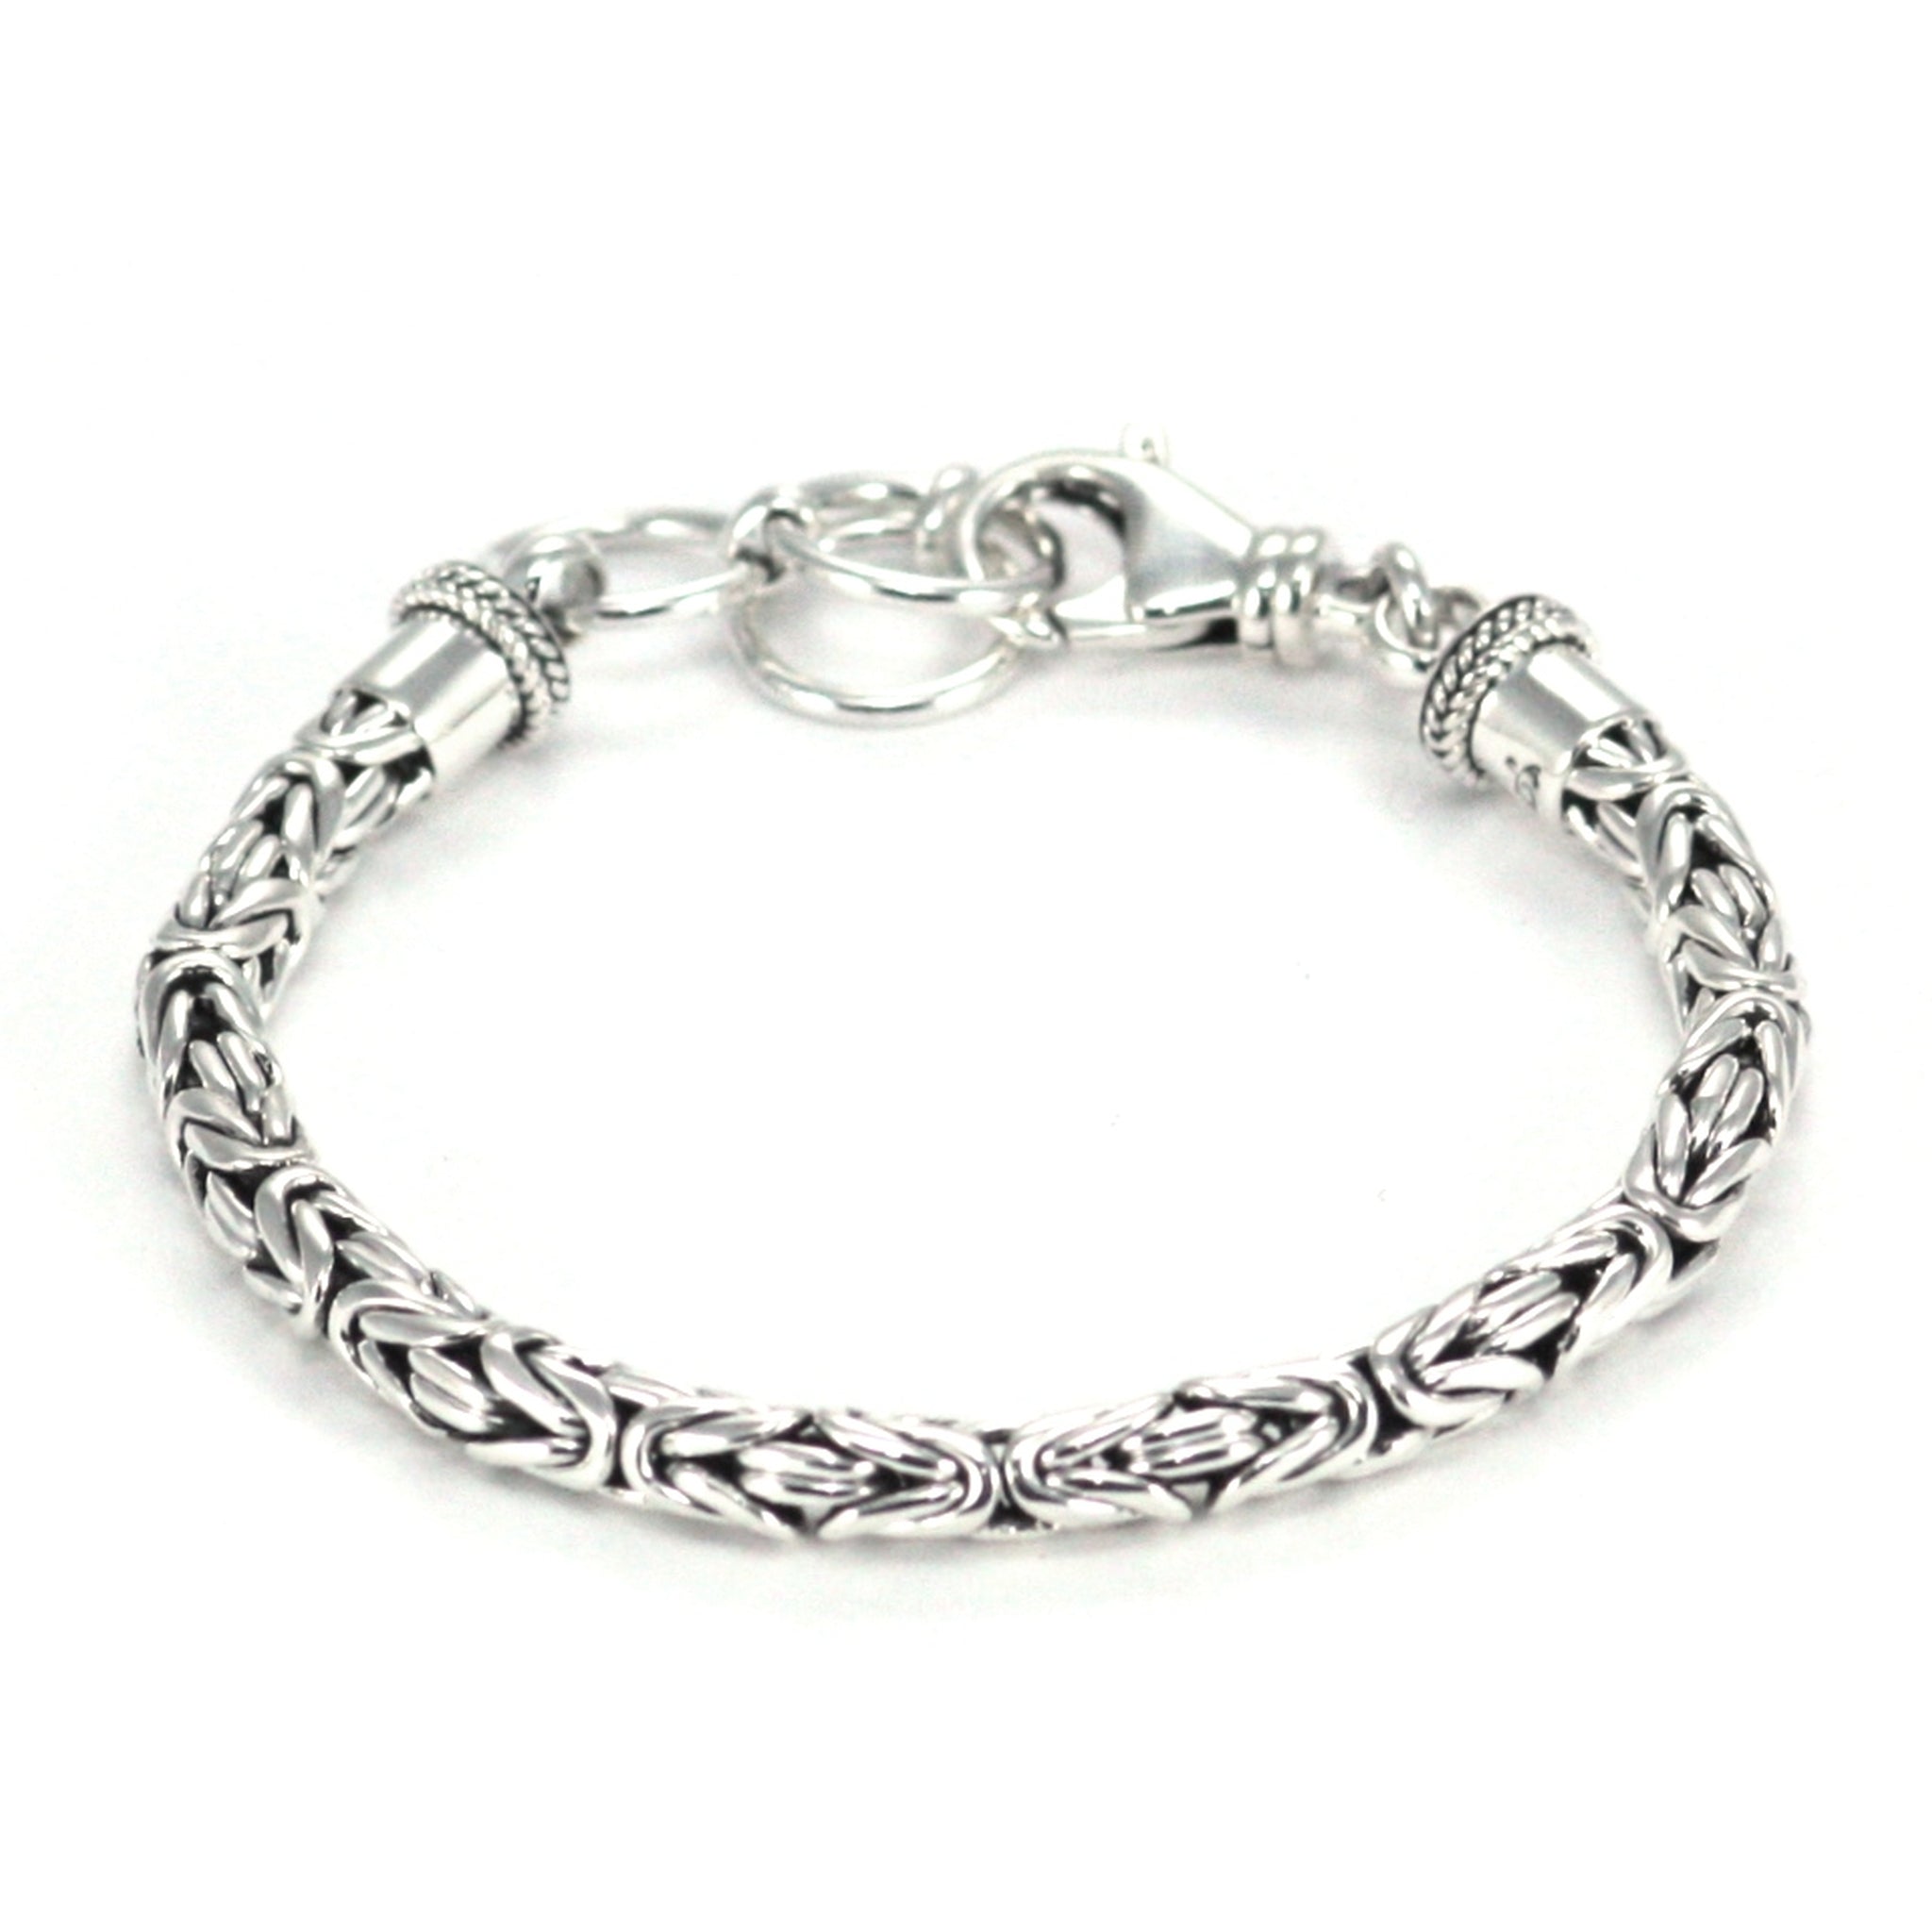 Men's Sterling Silver Thick Curb Chain Bracelet - Jewelry1000.com